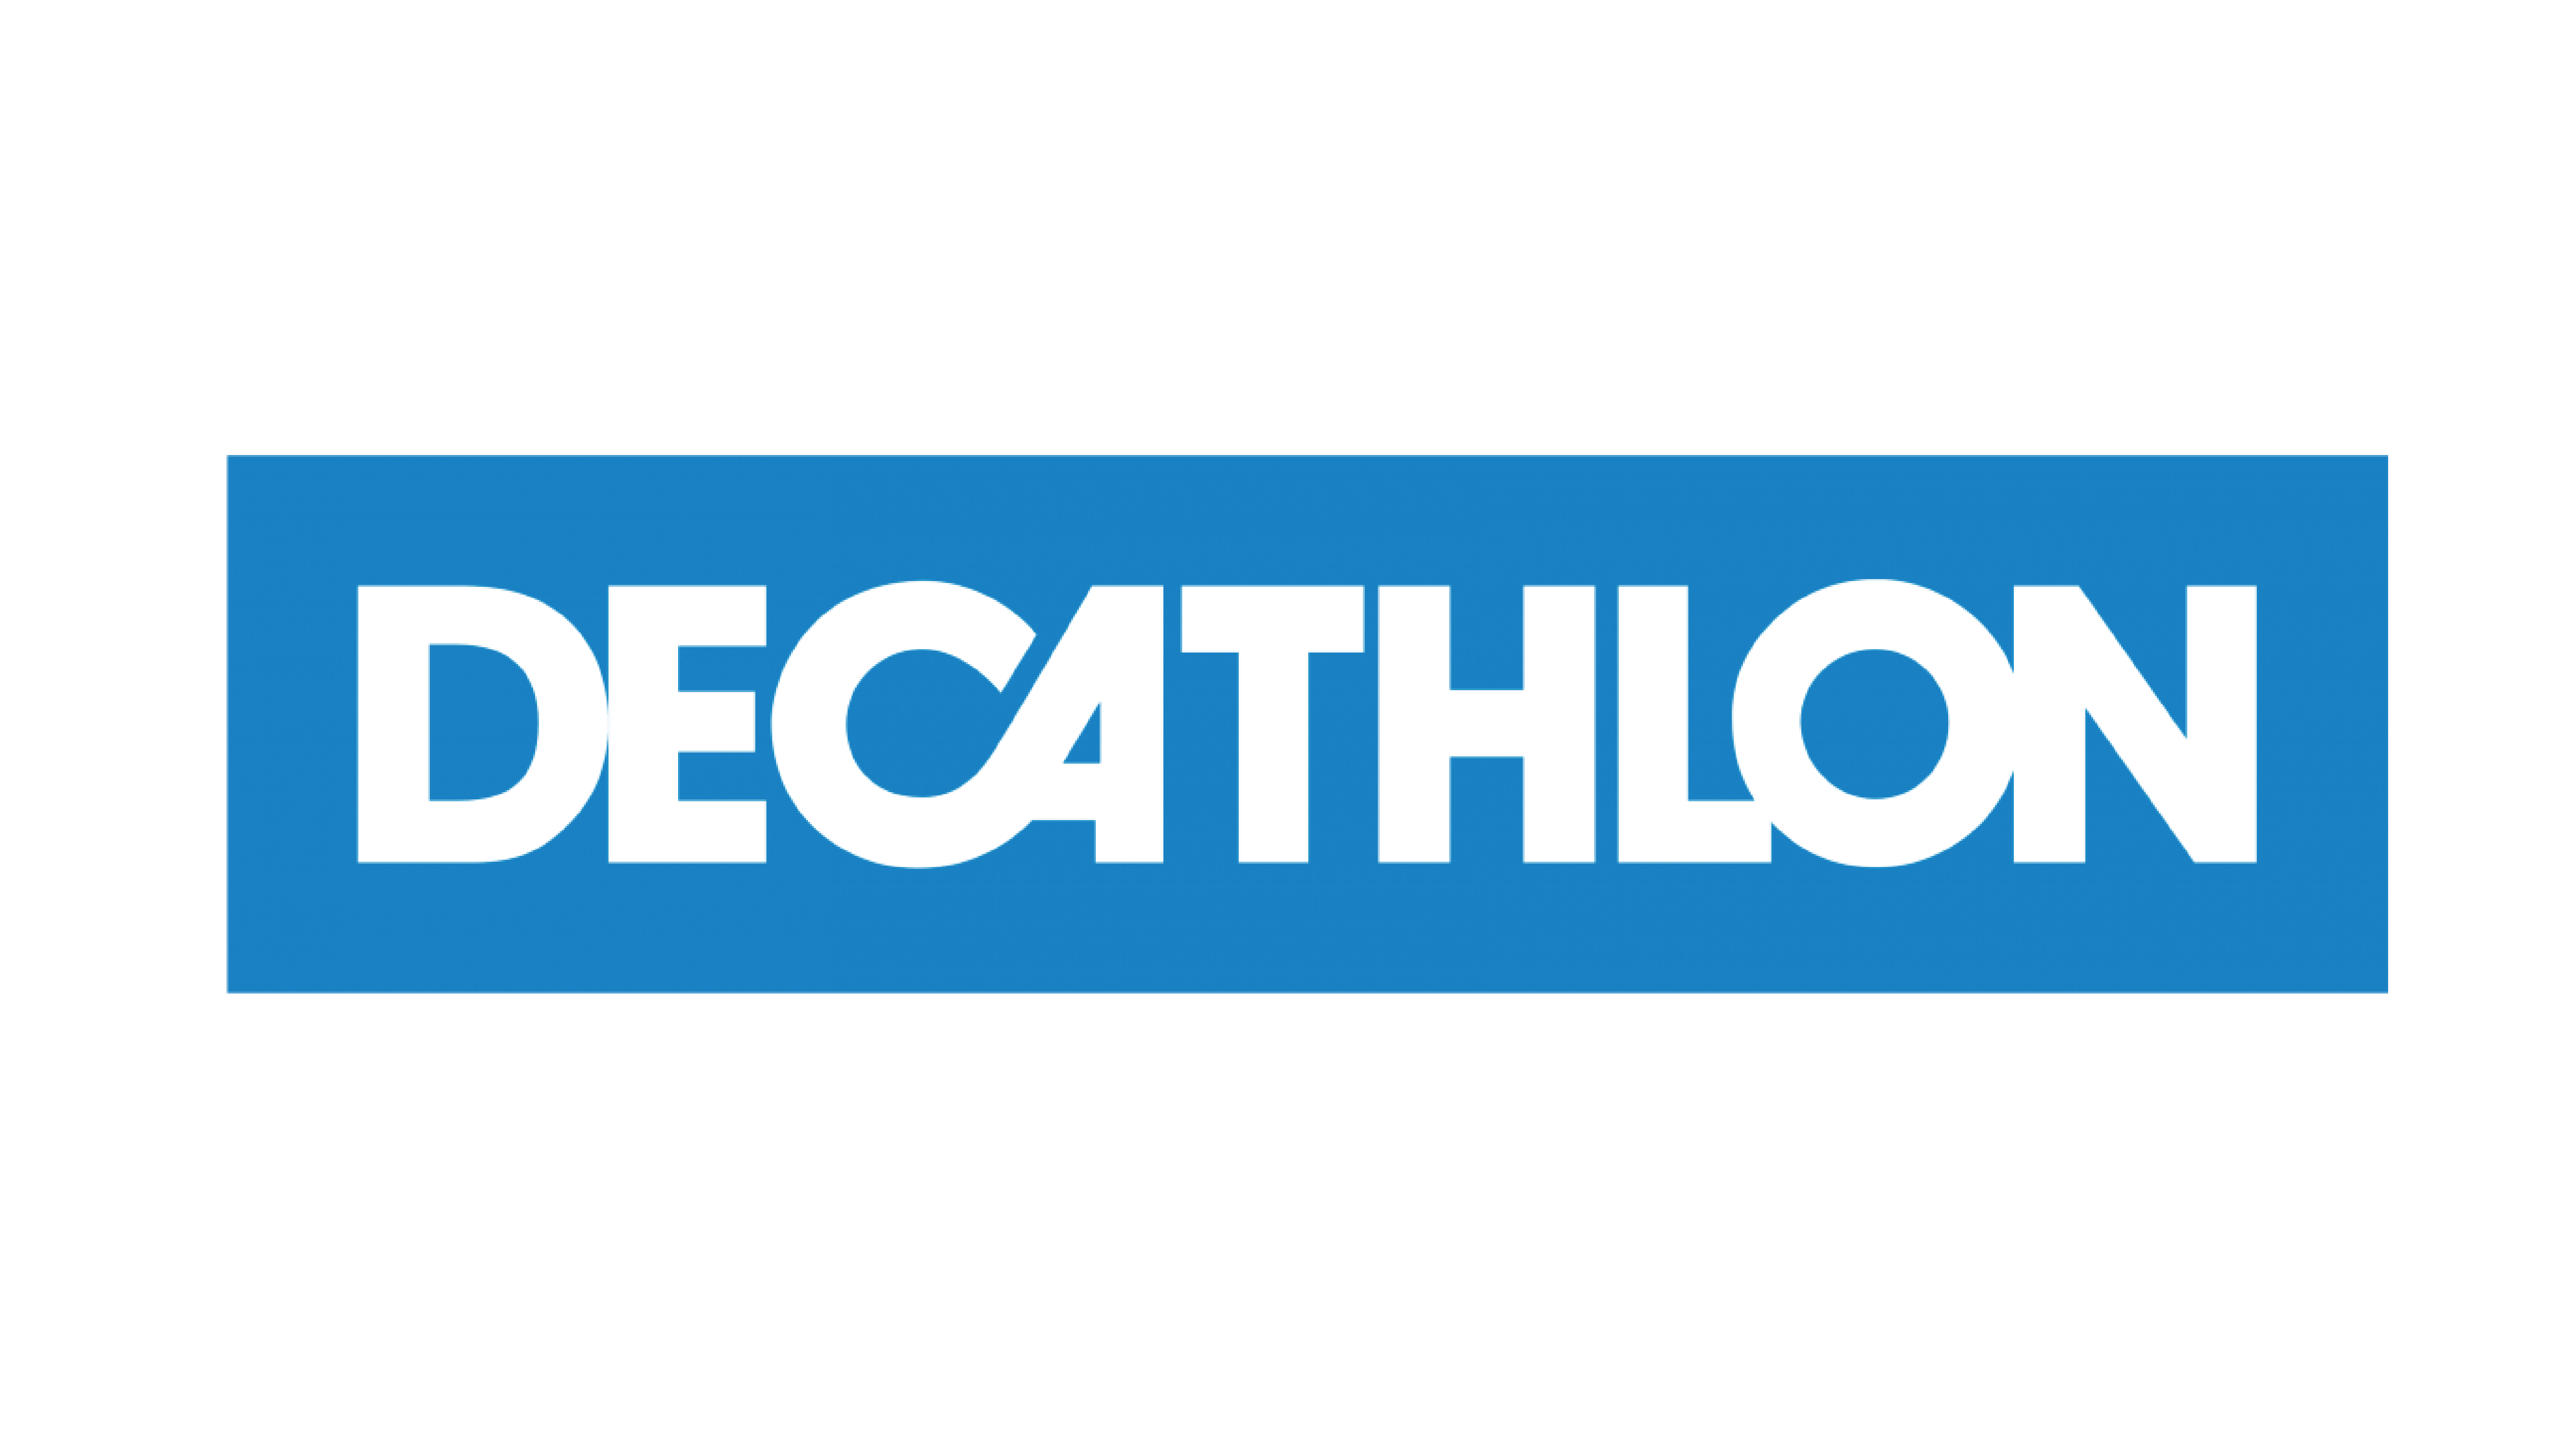 Decathlon innovates more and faster at 